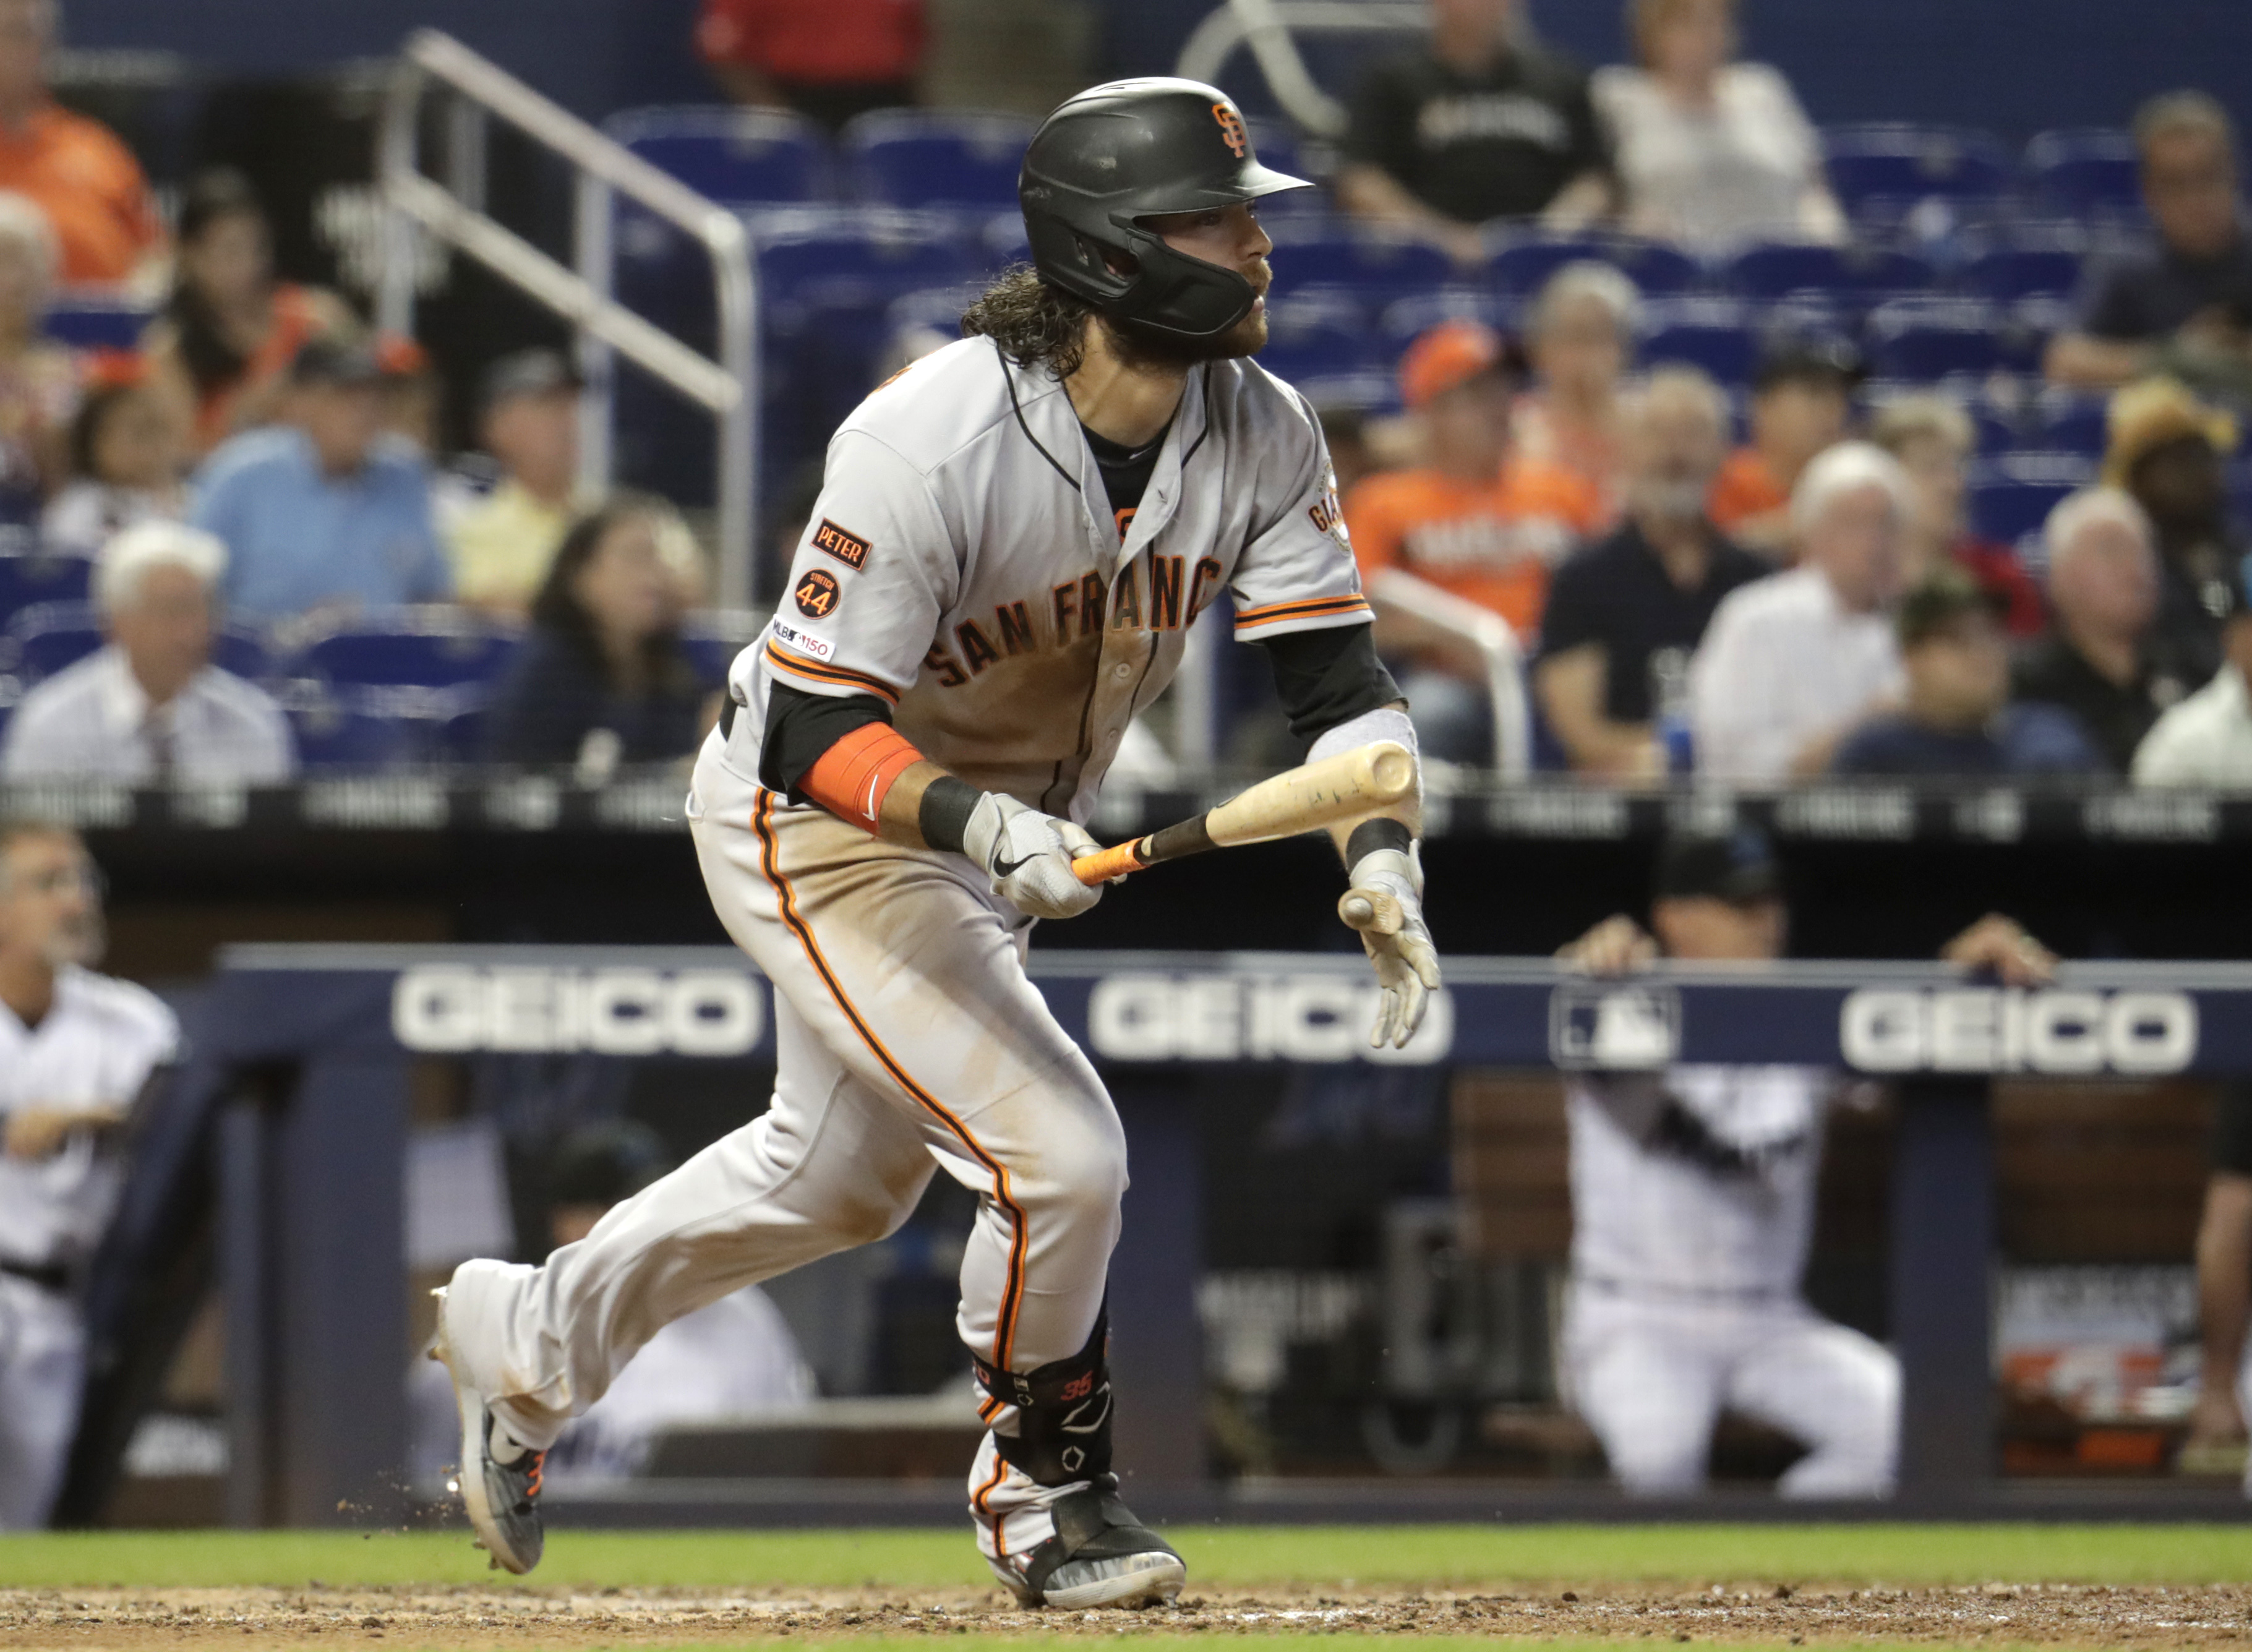 Giants snap 7-game losing streak with 3-1 win over Marlins